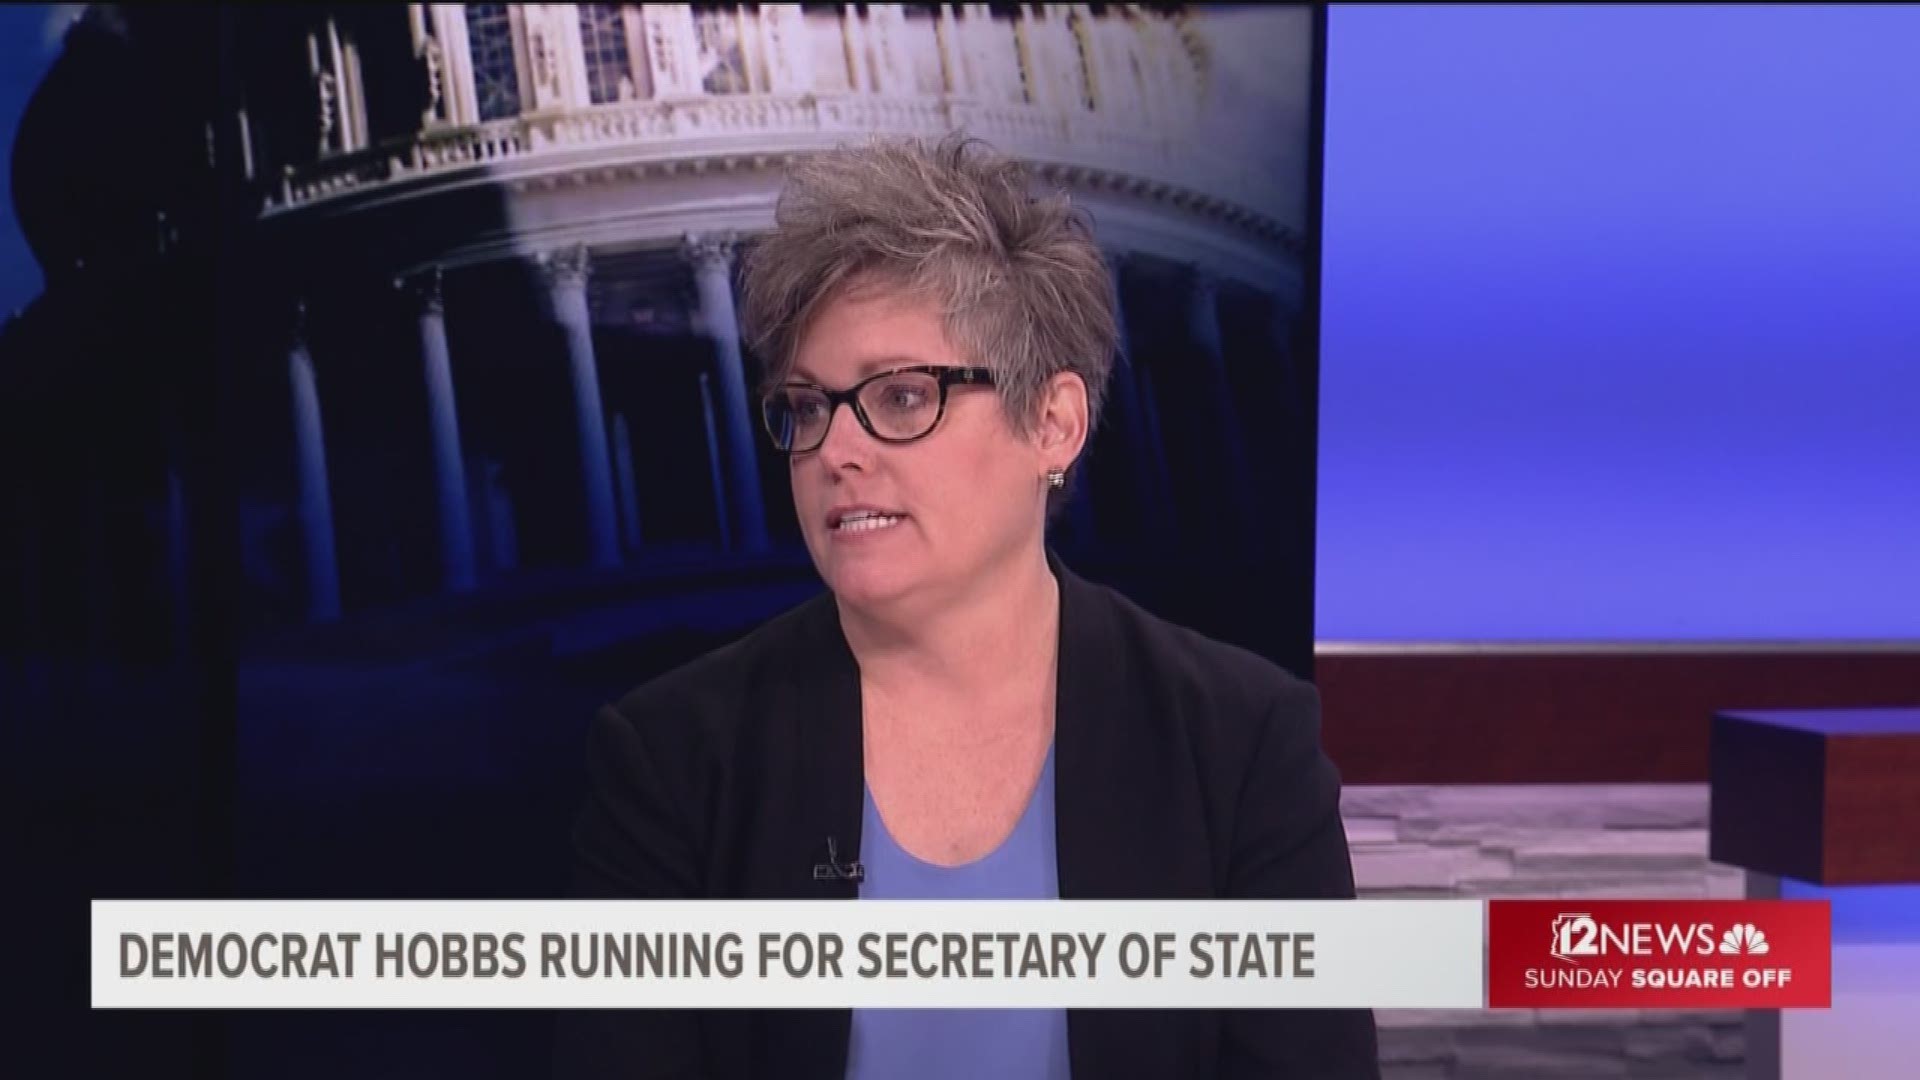 Democratic State Sen. Katie Hobbs talks about her run for secretary of state against Republican Steve Gaynor. The secretary of state is Arizona's top elections official and first in line to succeed the governor should that office become vacant.